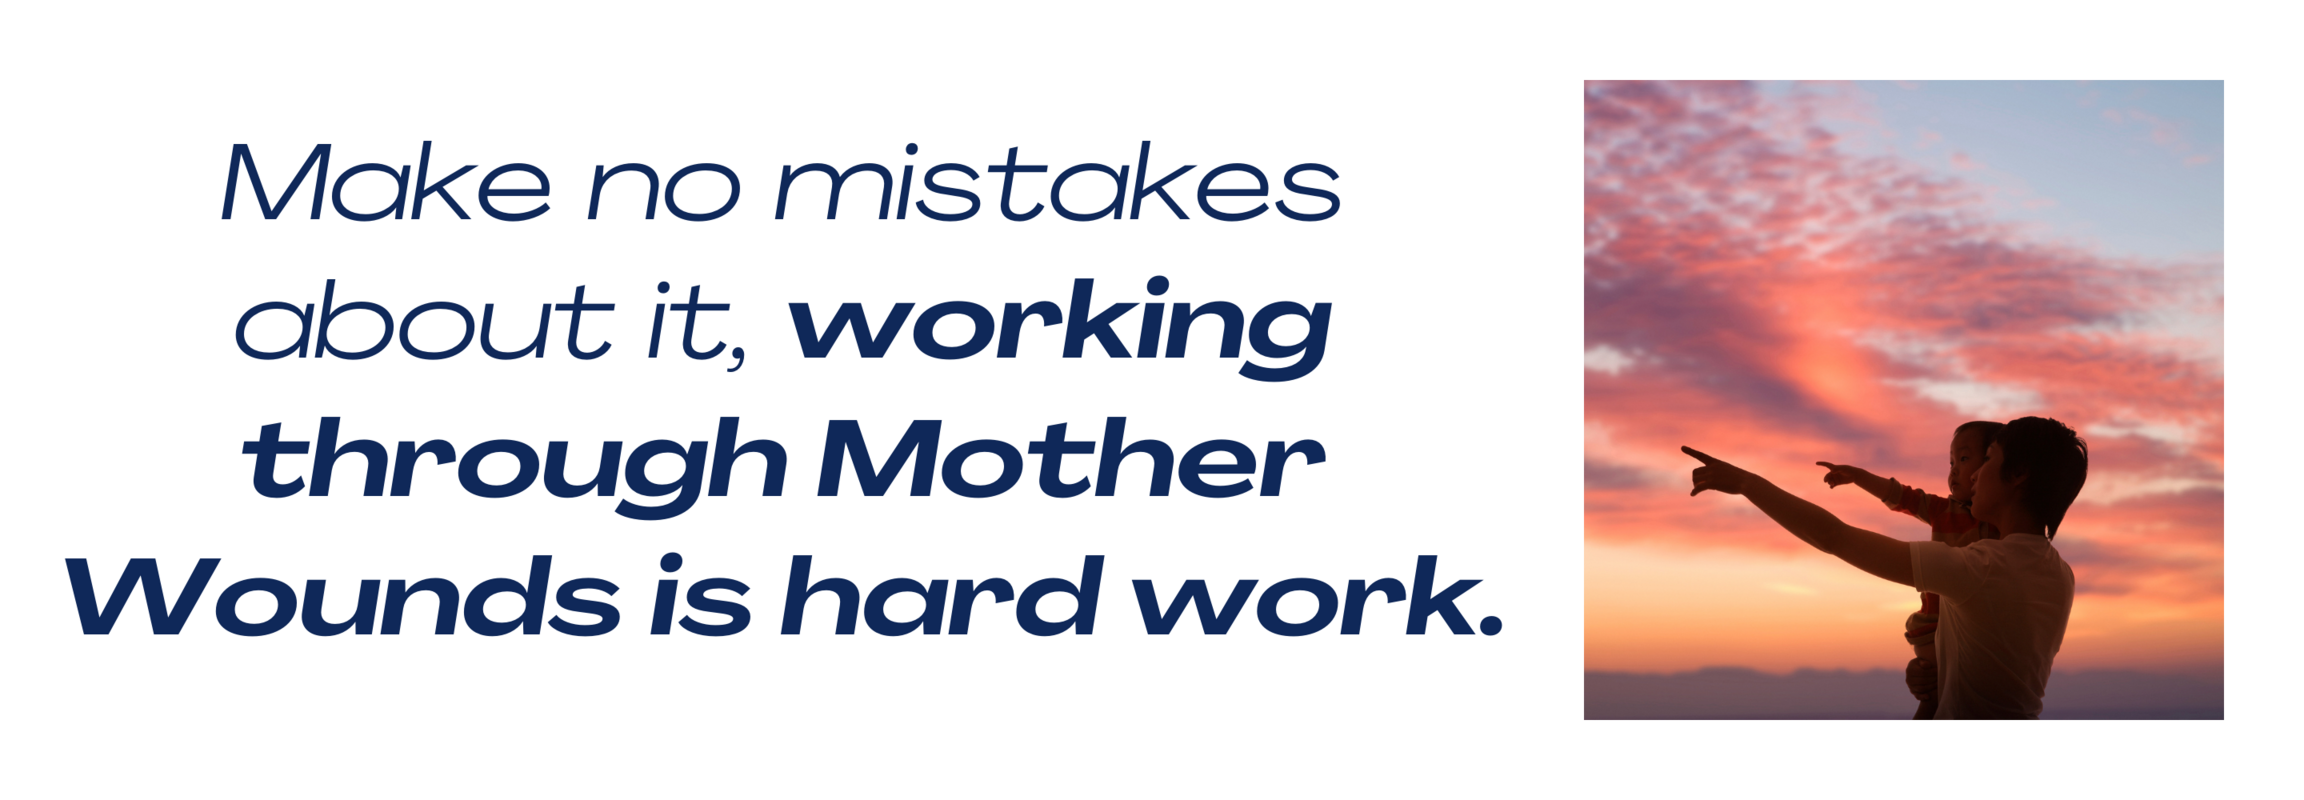 Make no mistakes about it, working through Mother Wounds is hard work.